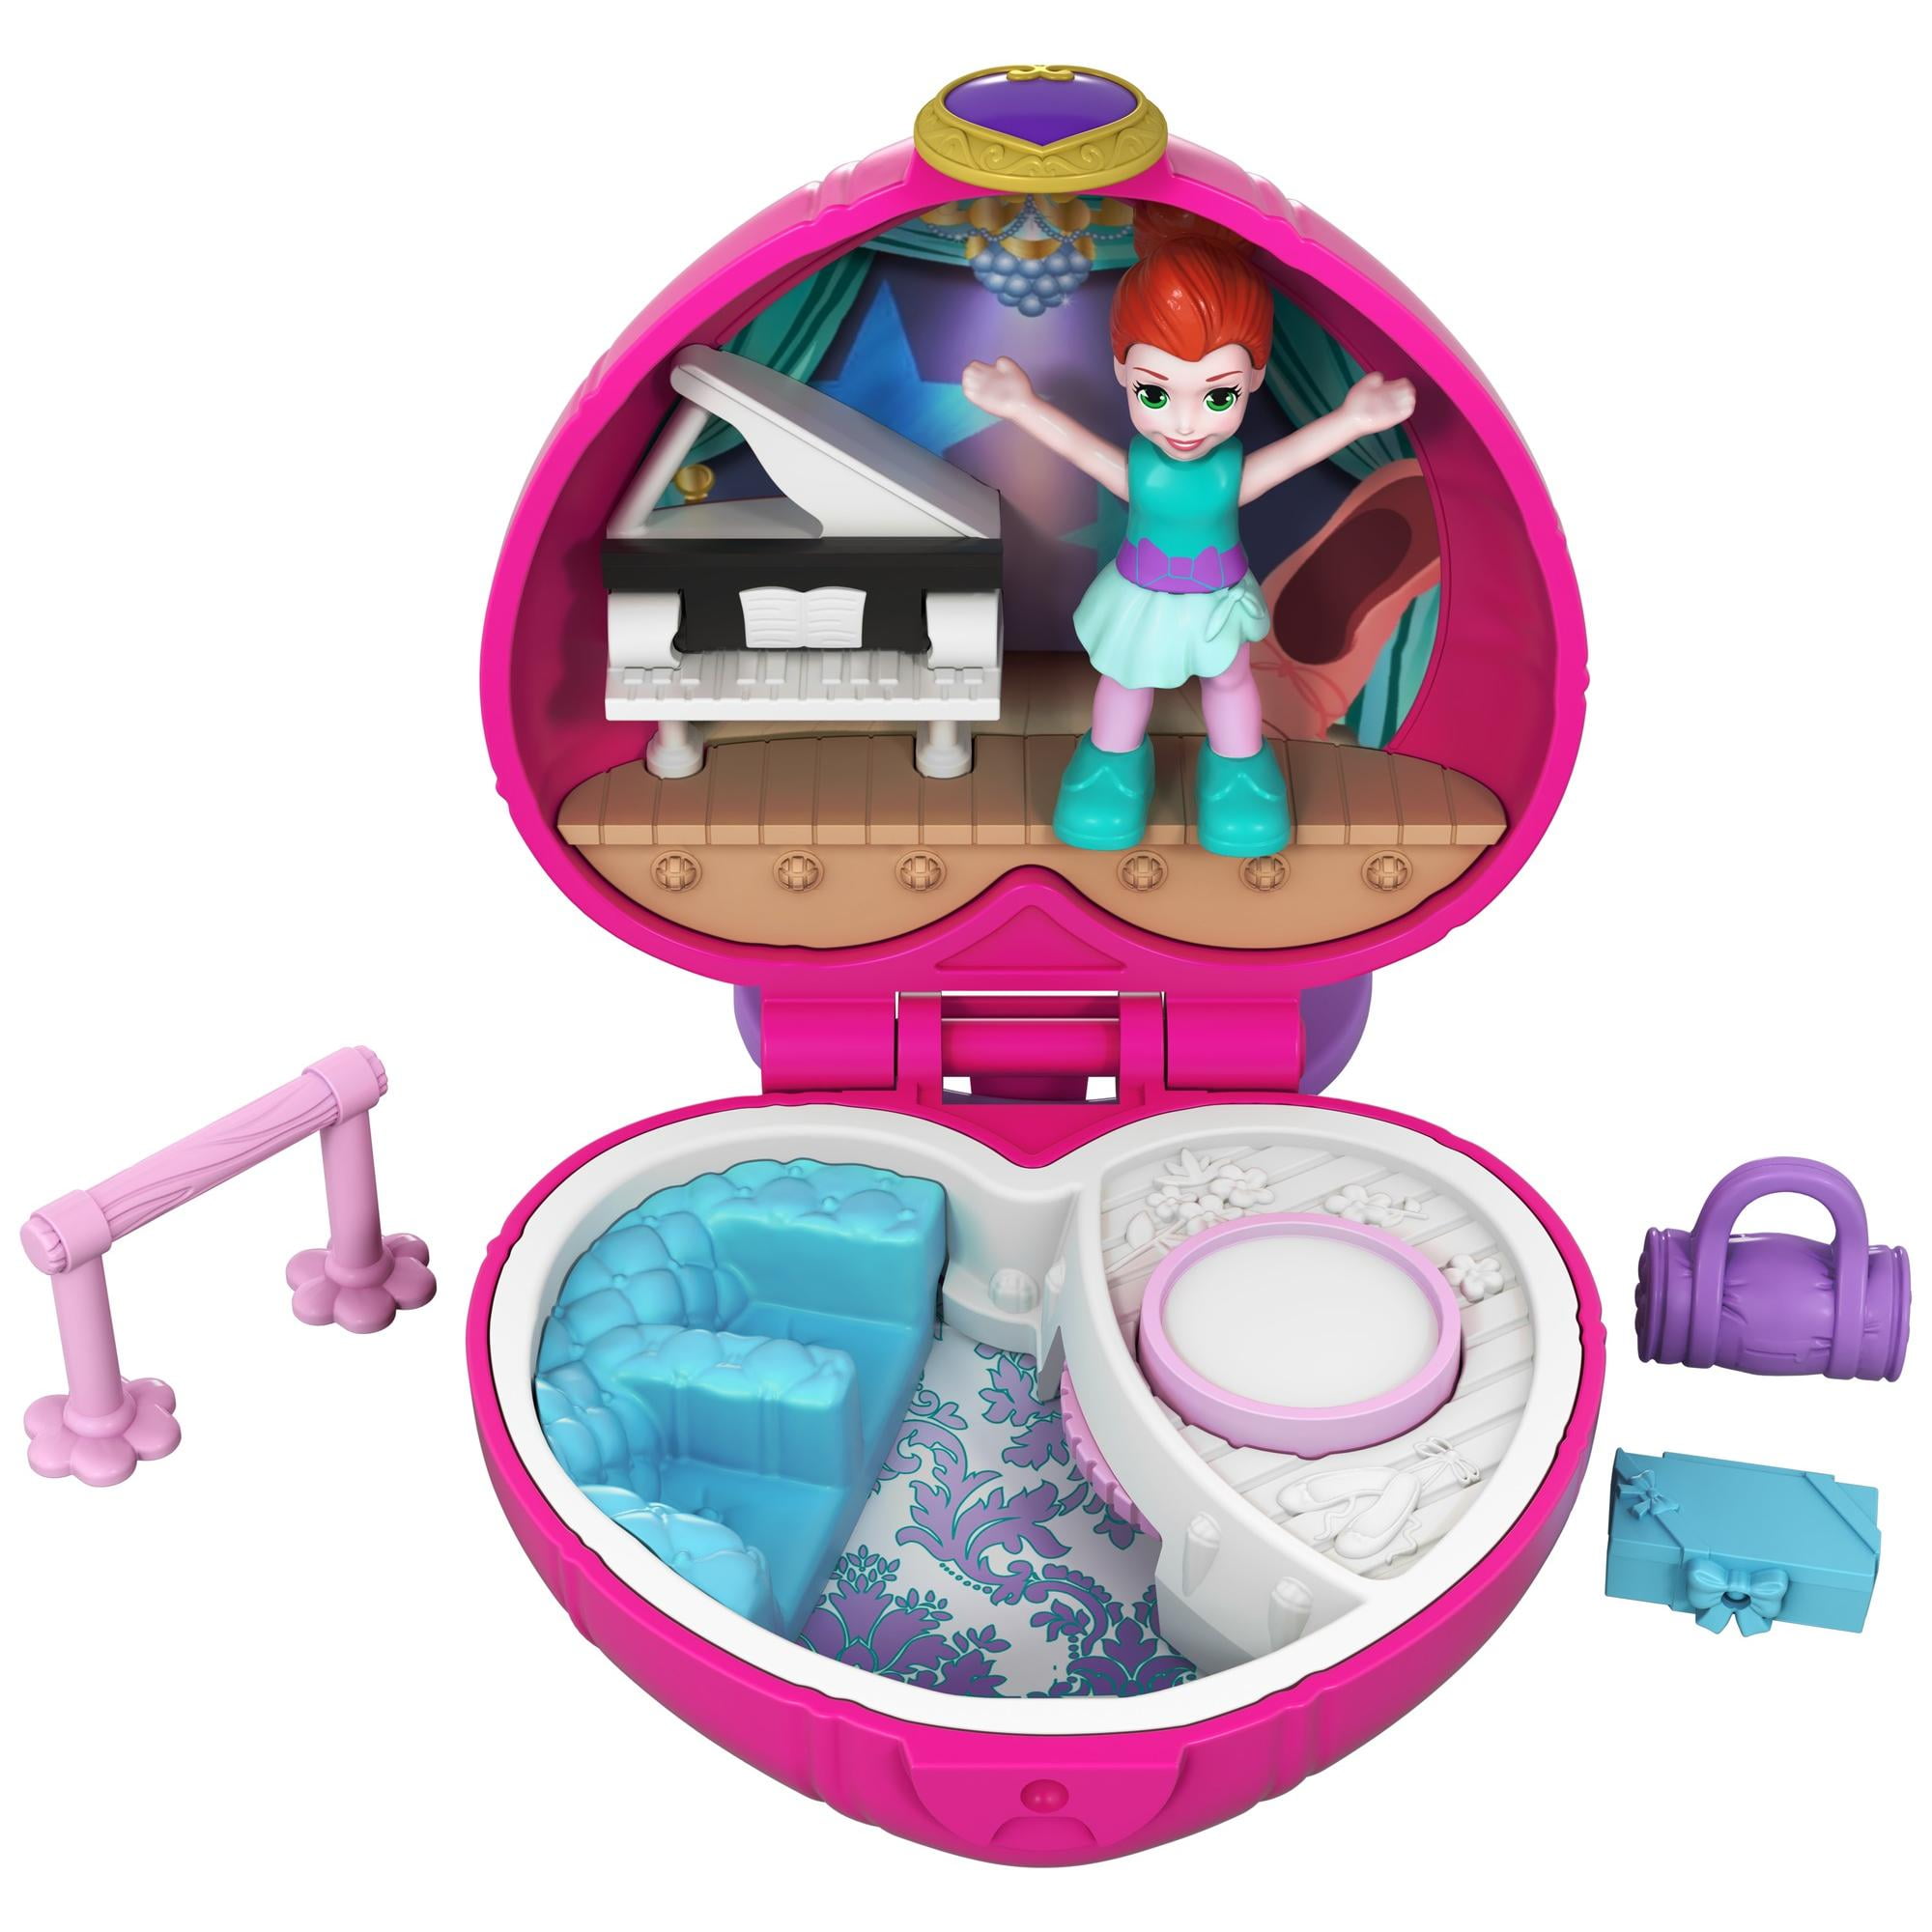 Polly Pocket Purrfect Playhouse compatto 